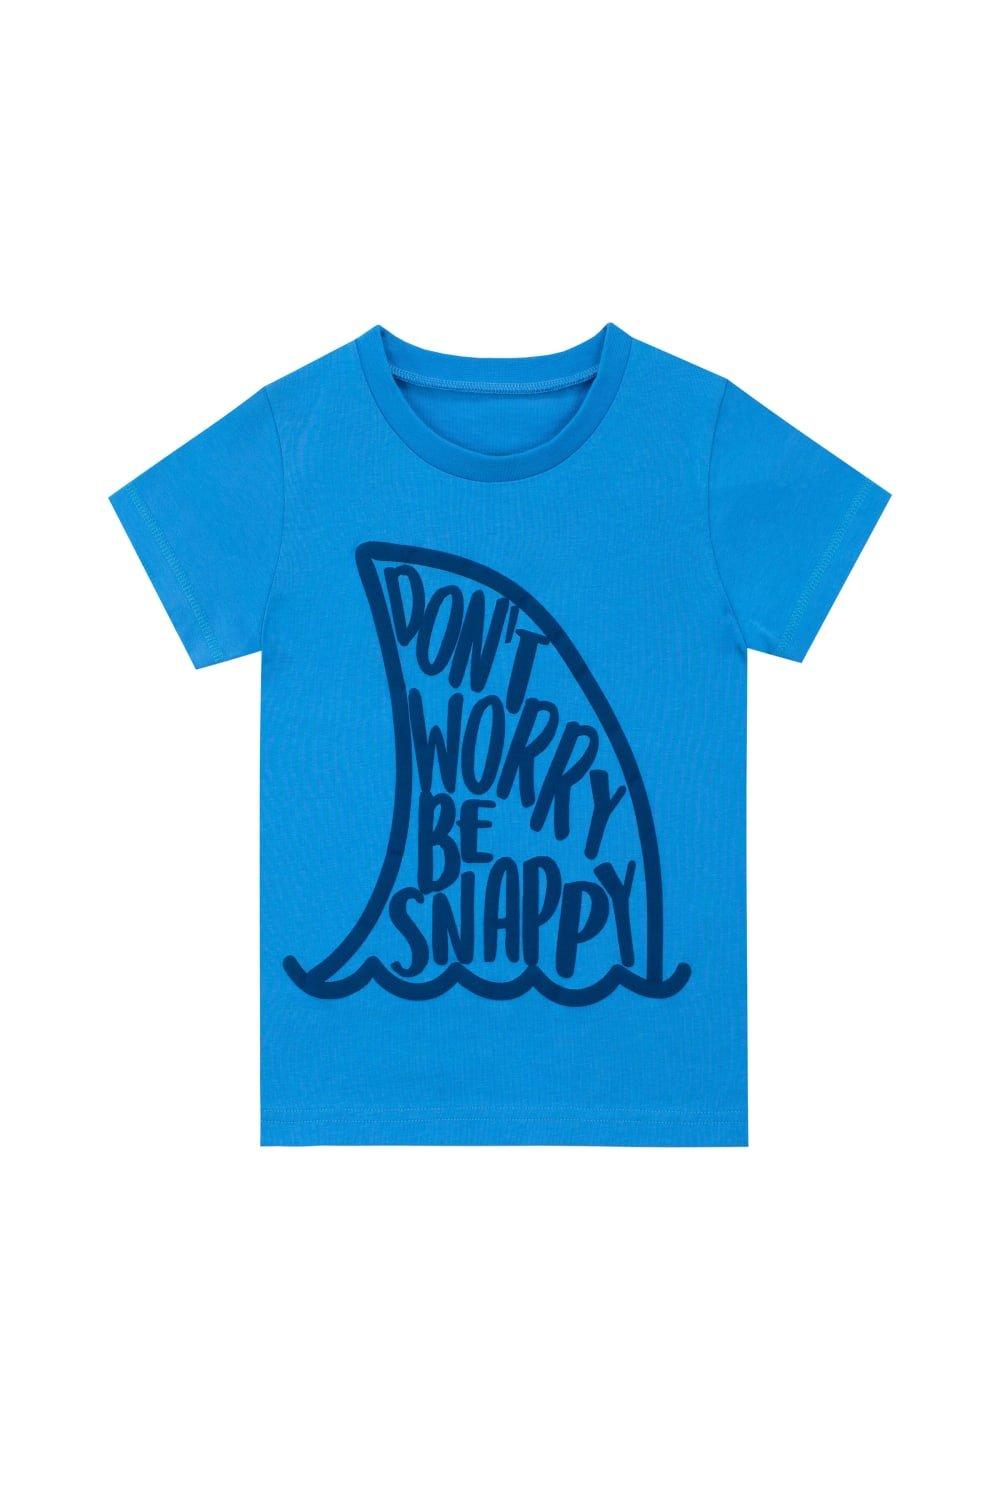 Don’t Worry Be Snappy Shark Fin T-Shirt